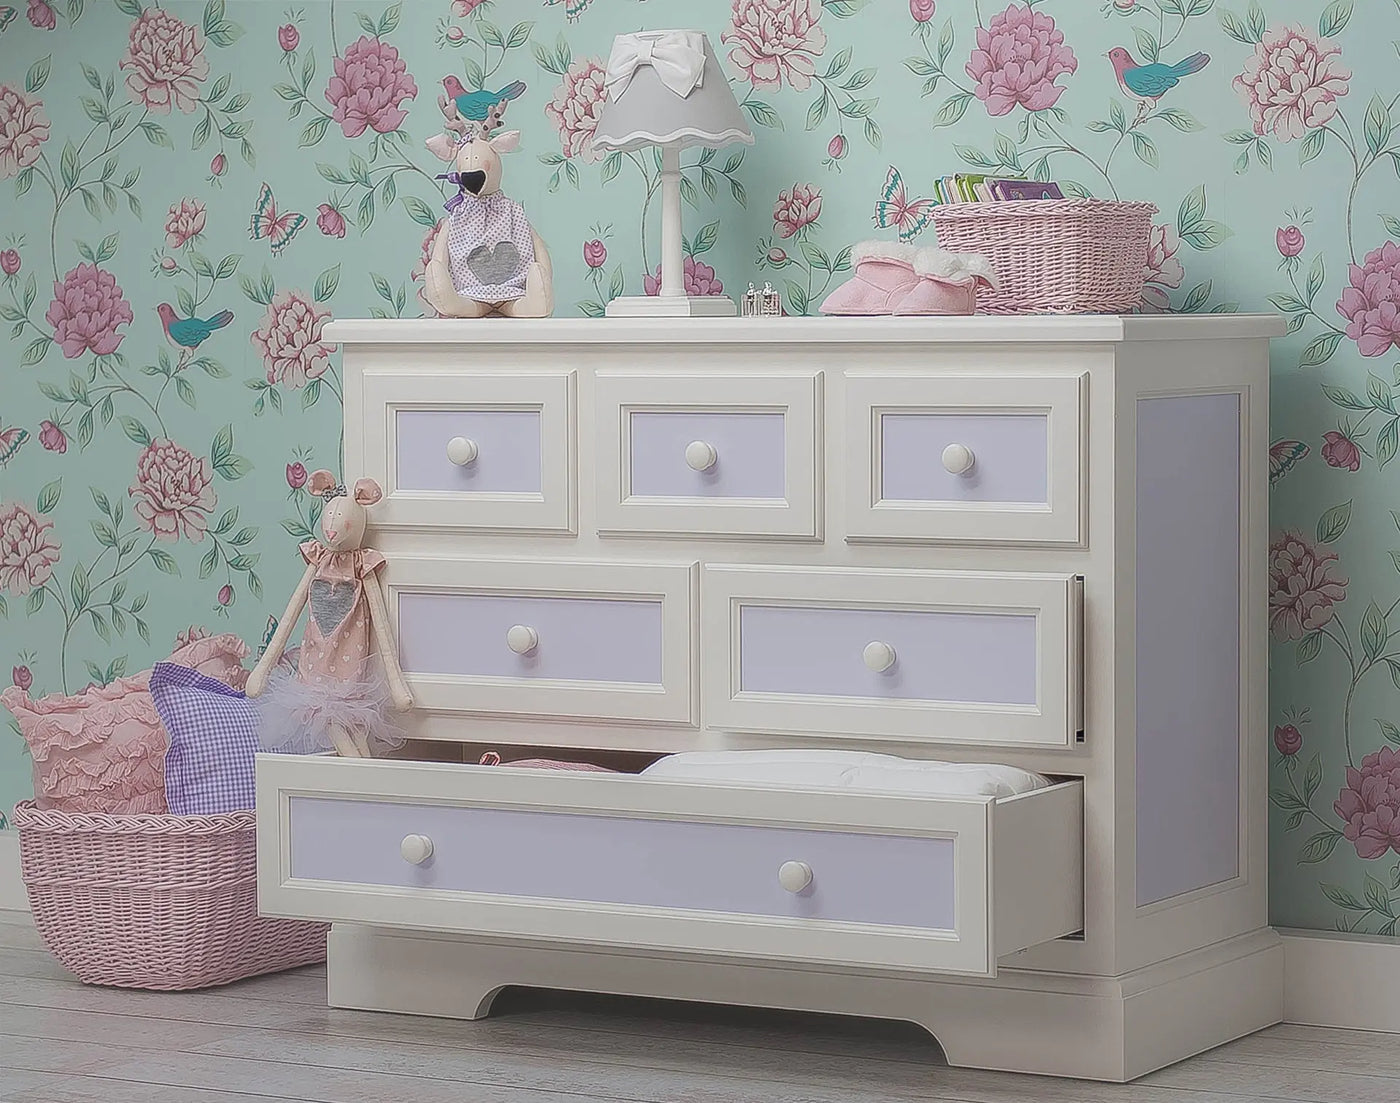 Chest of drawers Blue Almonds Ltd